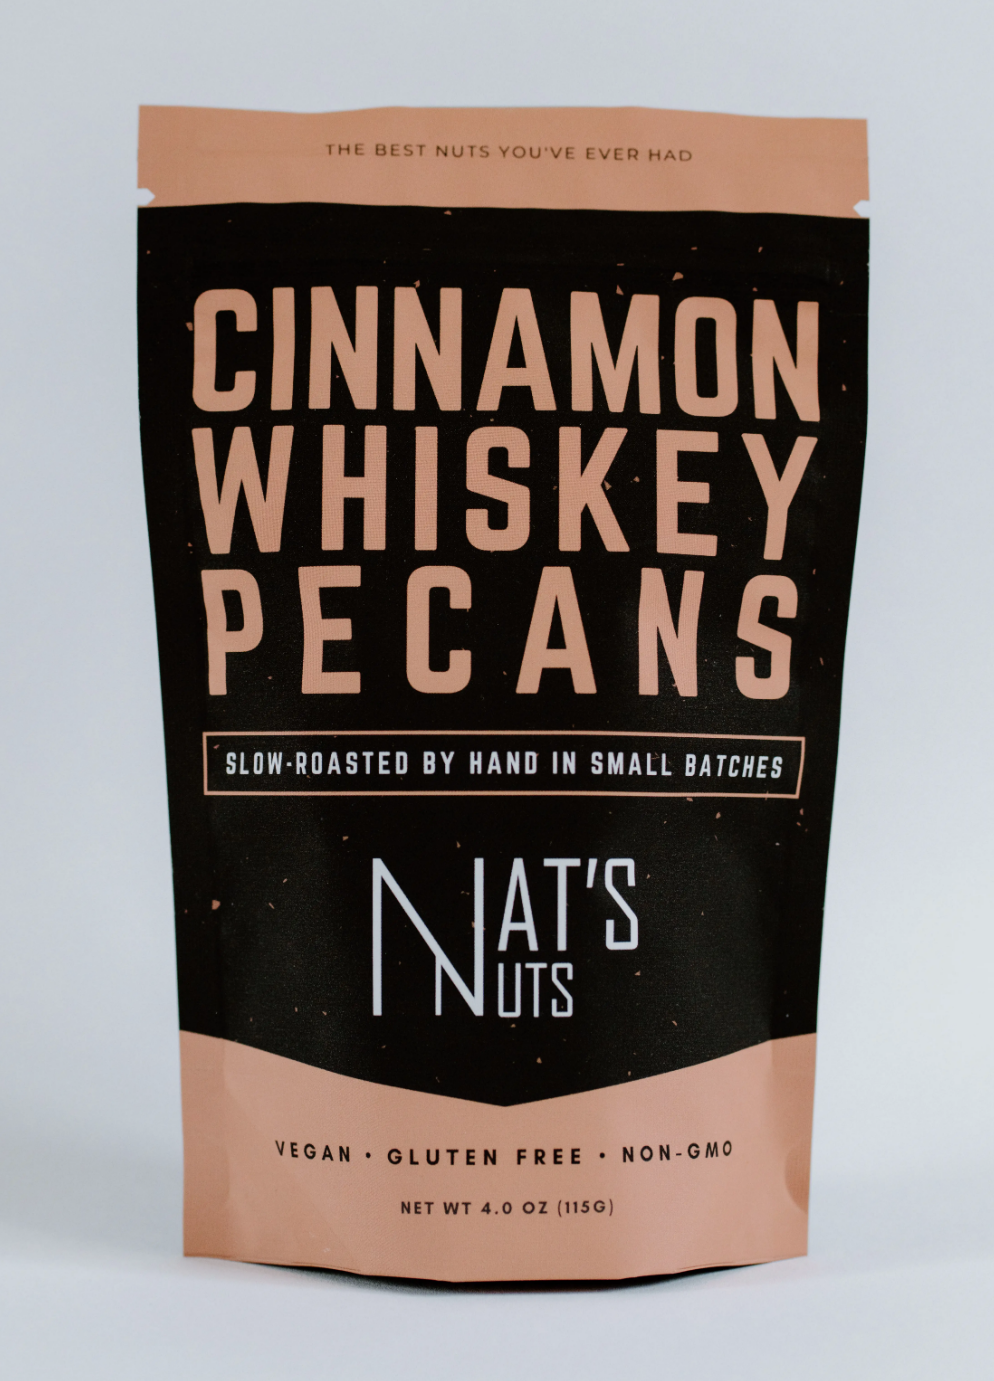 Cinnamon Whiskey Pecans by Nat's Nuts